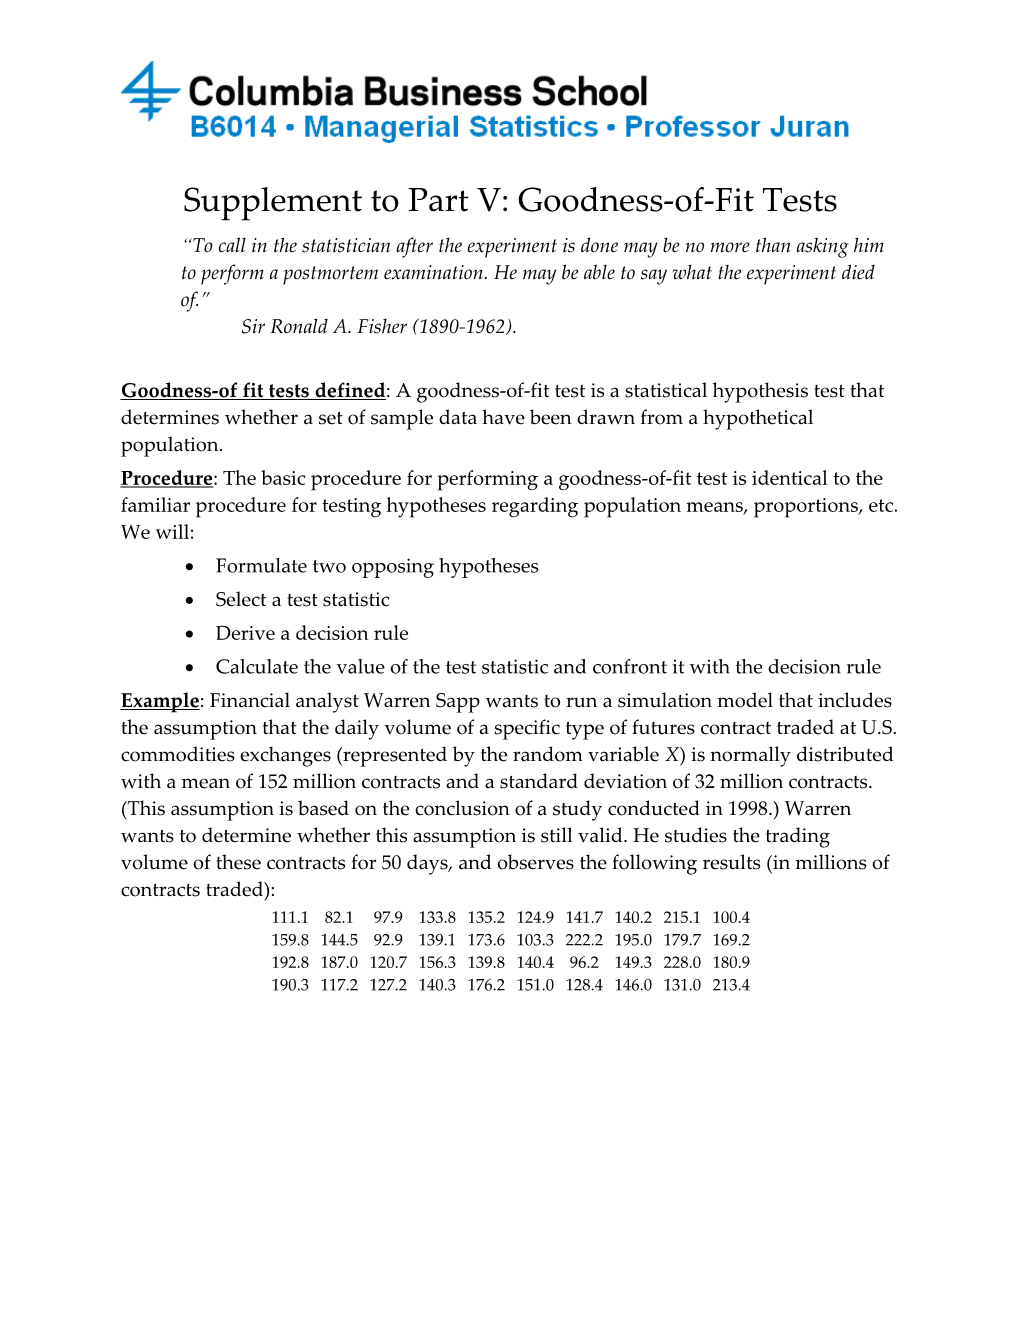 Supplement to Part V: Goodness-Of-Fit Tests